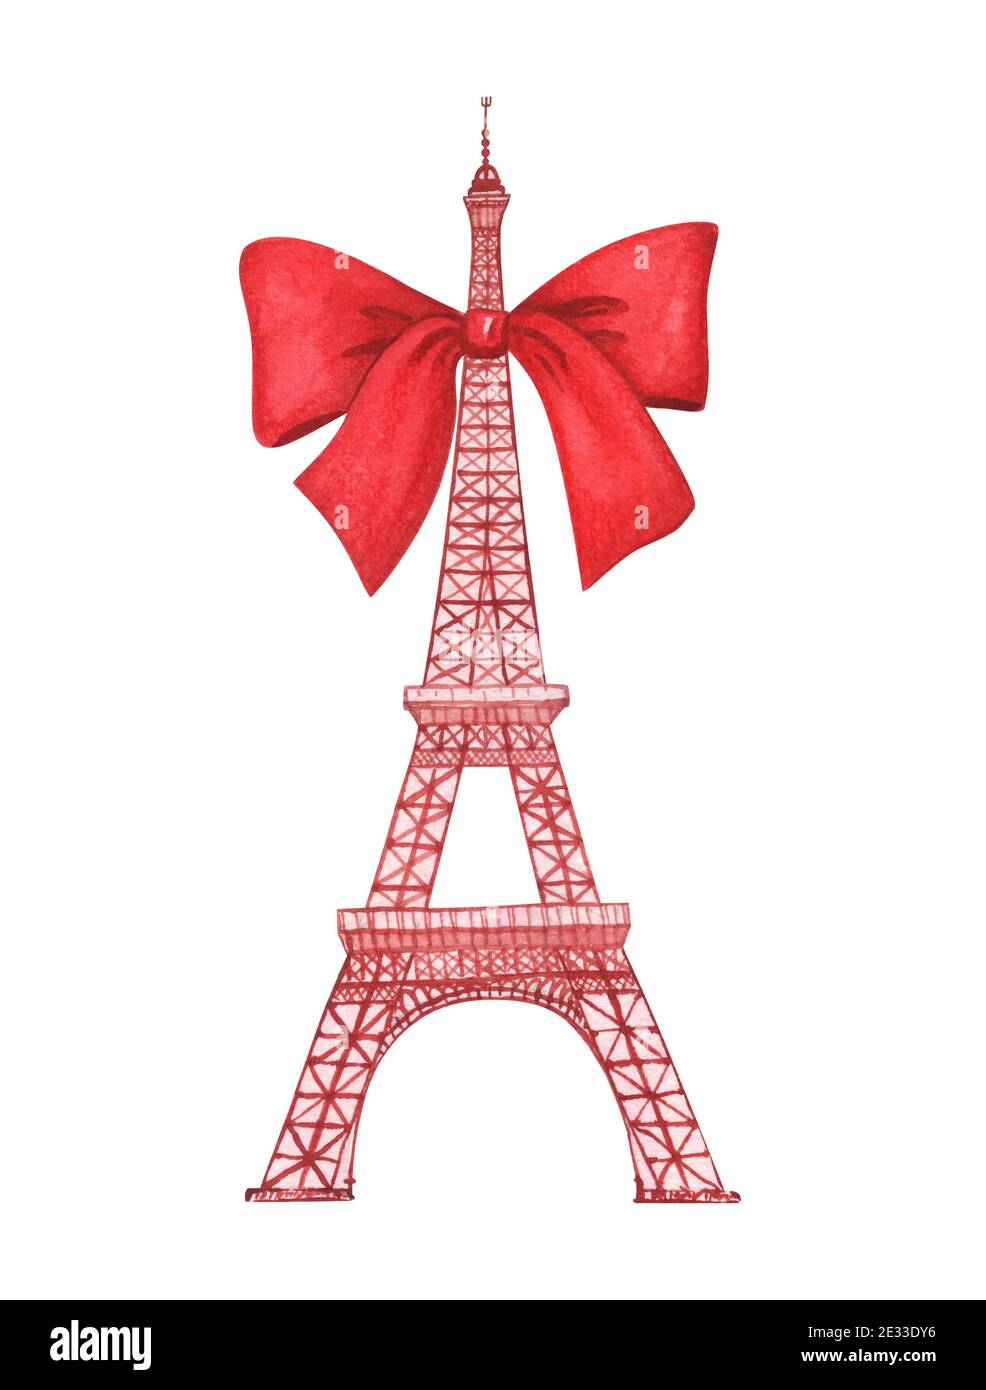 Eiffel tower with red bow isolated on white Stock Photo